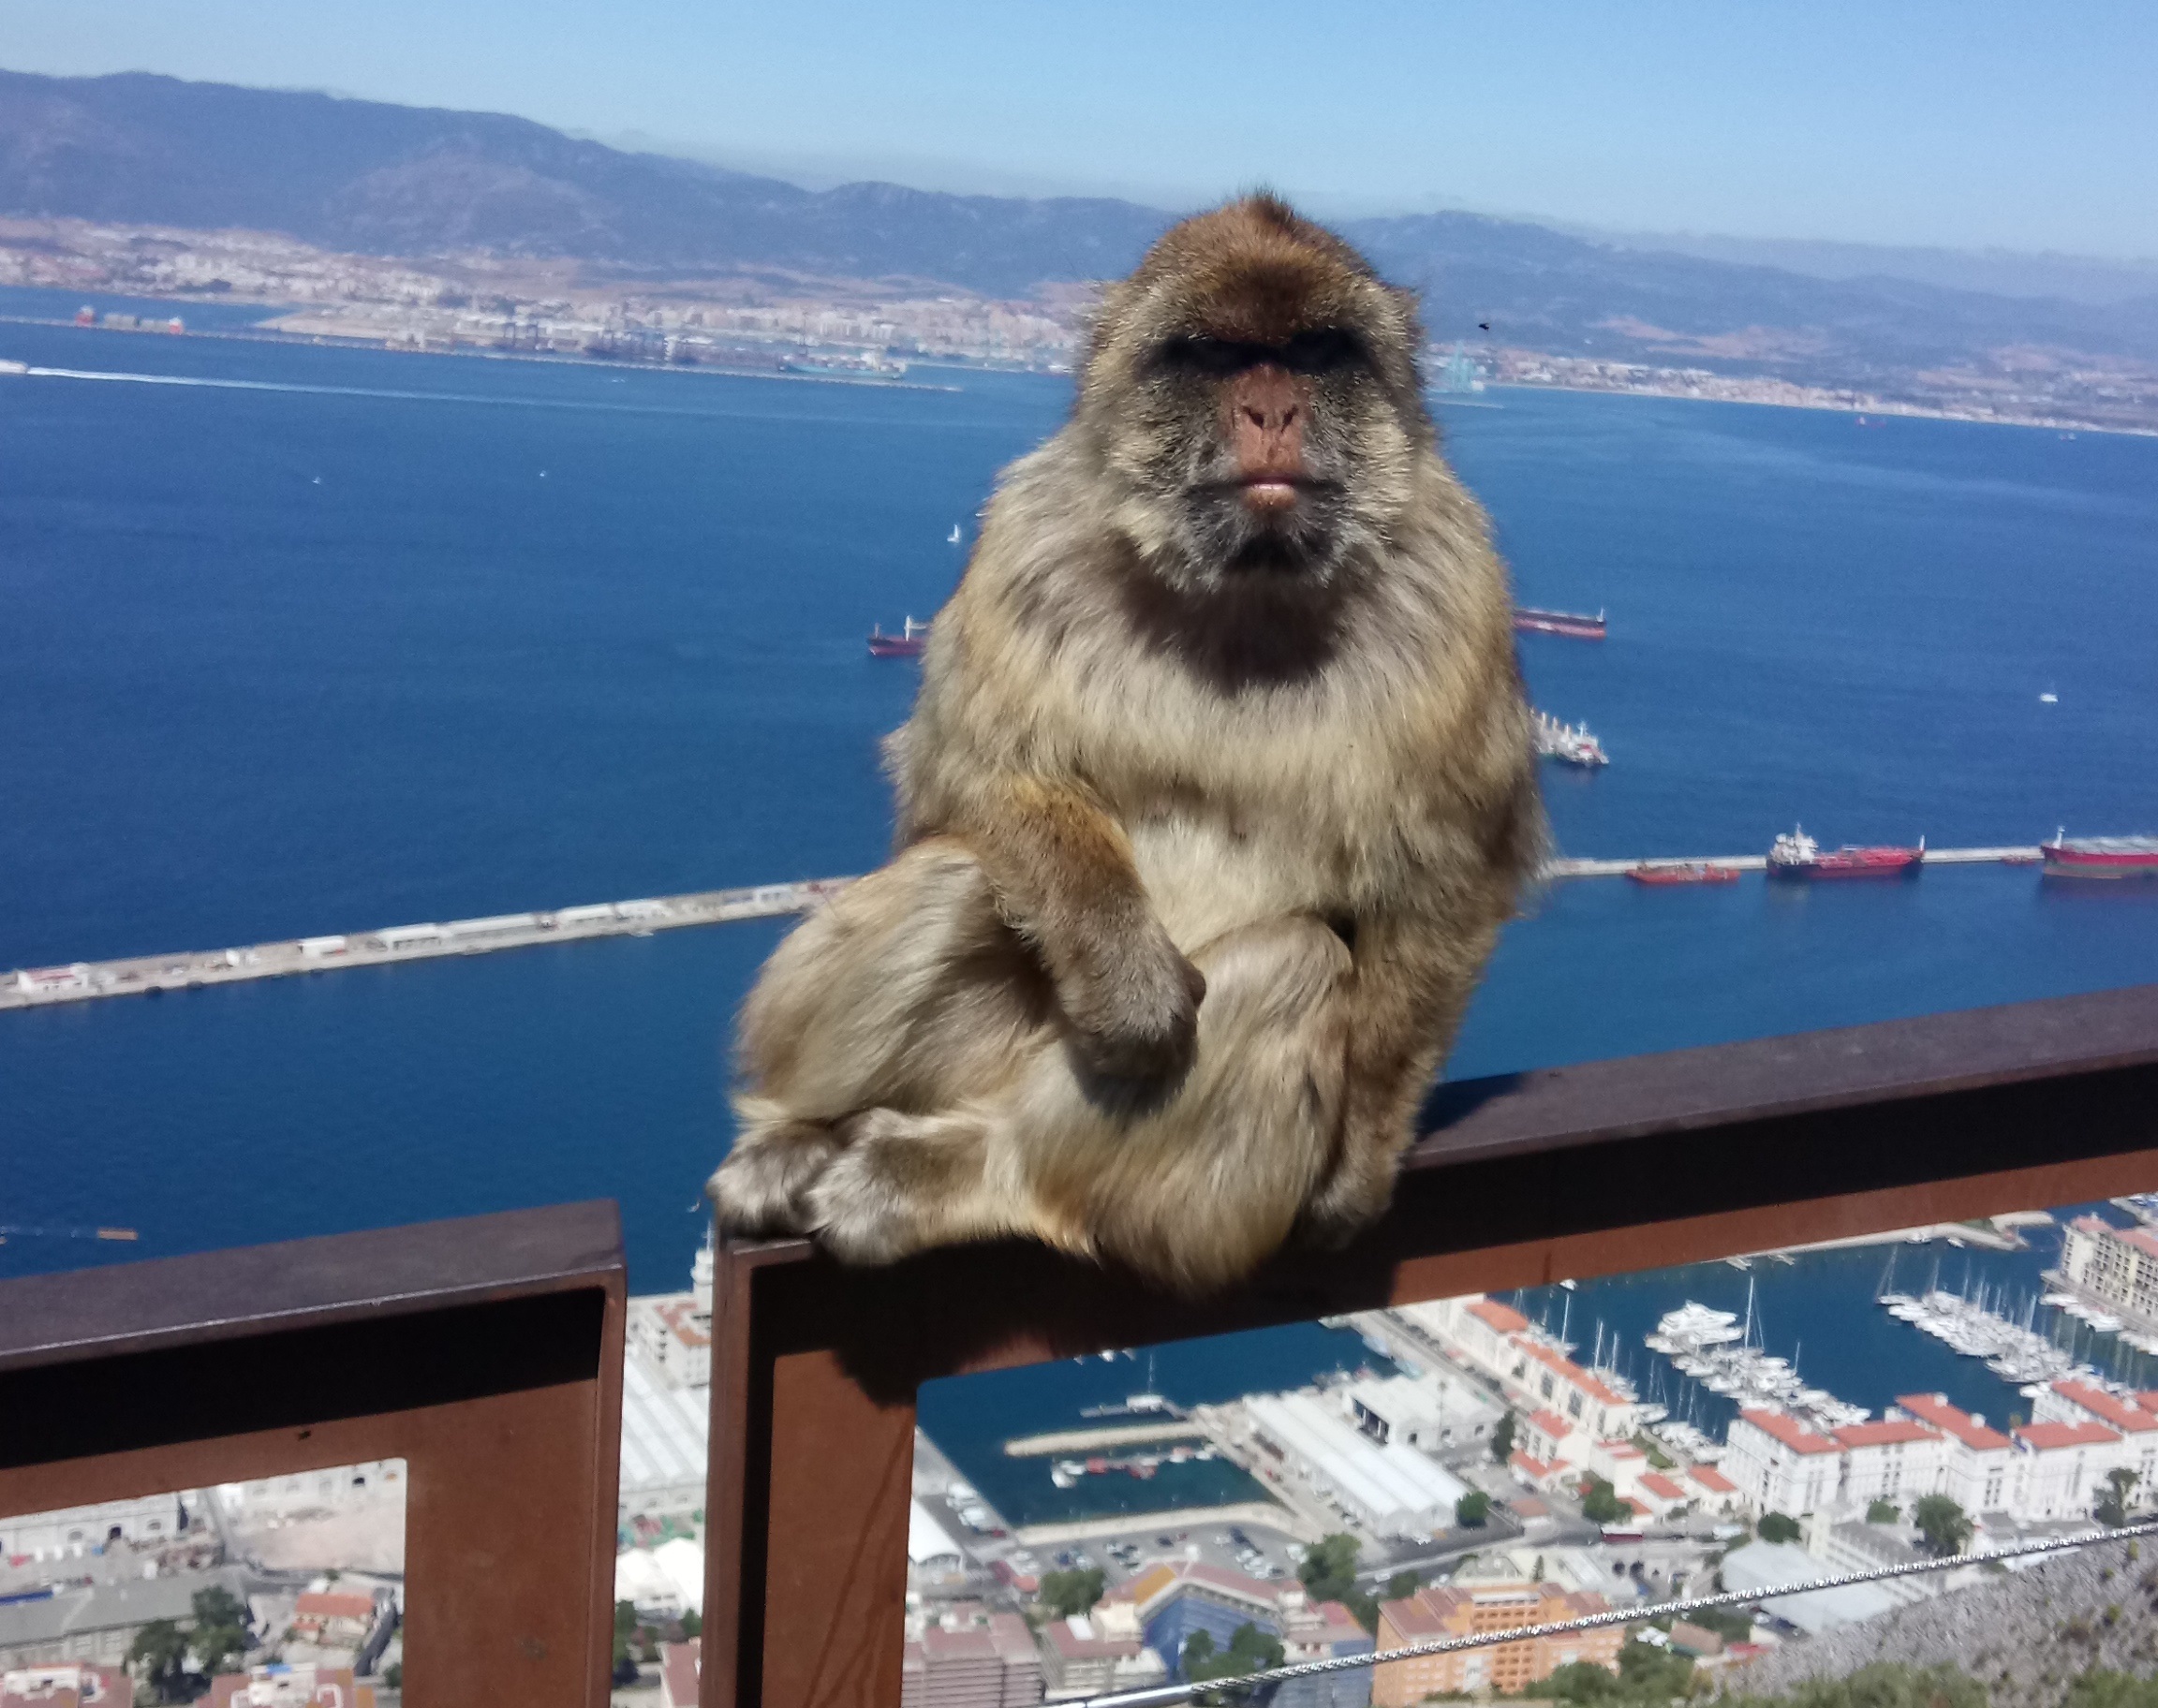 How to stear clear of the tourist masses in Gibraltar - and how to get a truly authentic experience there